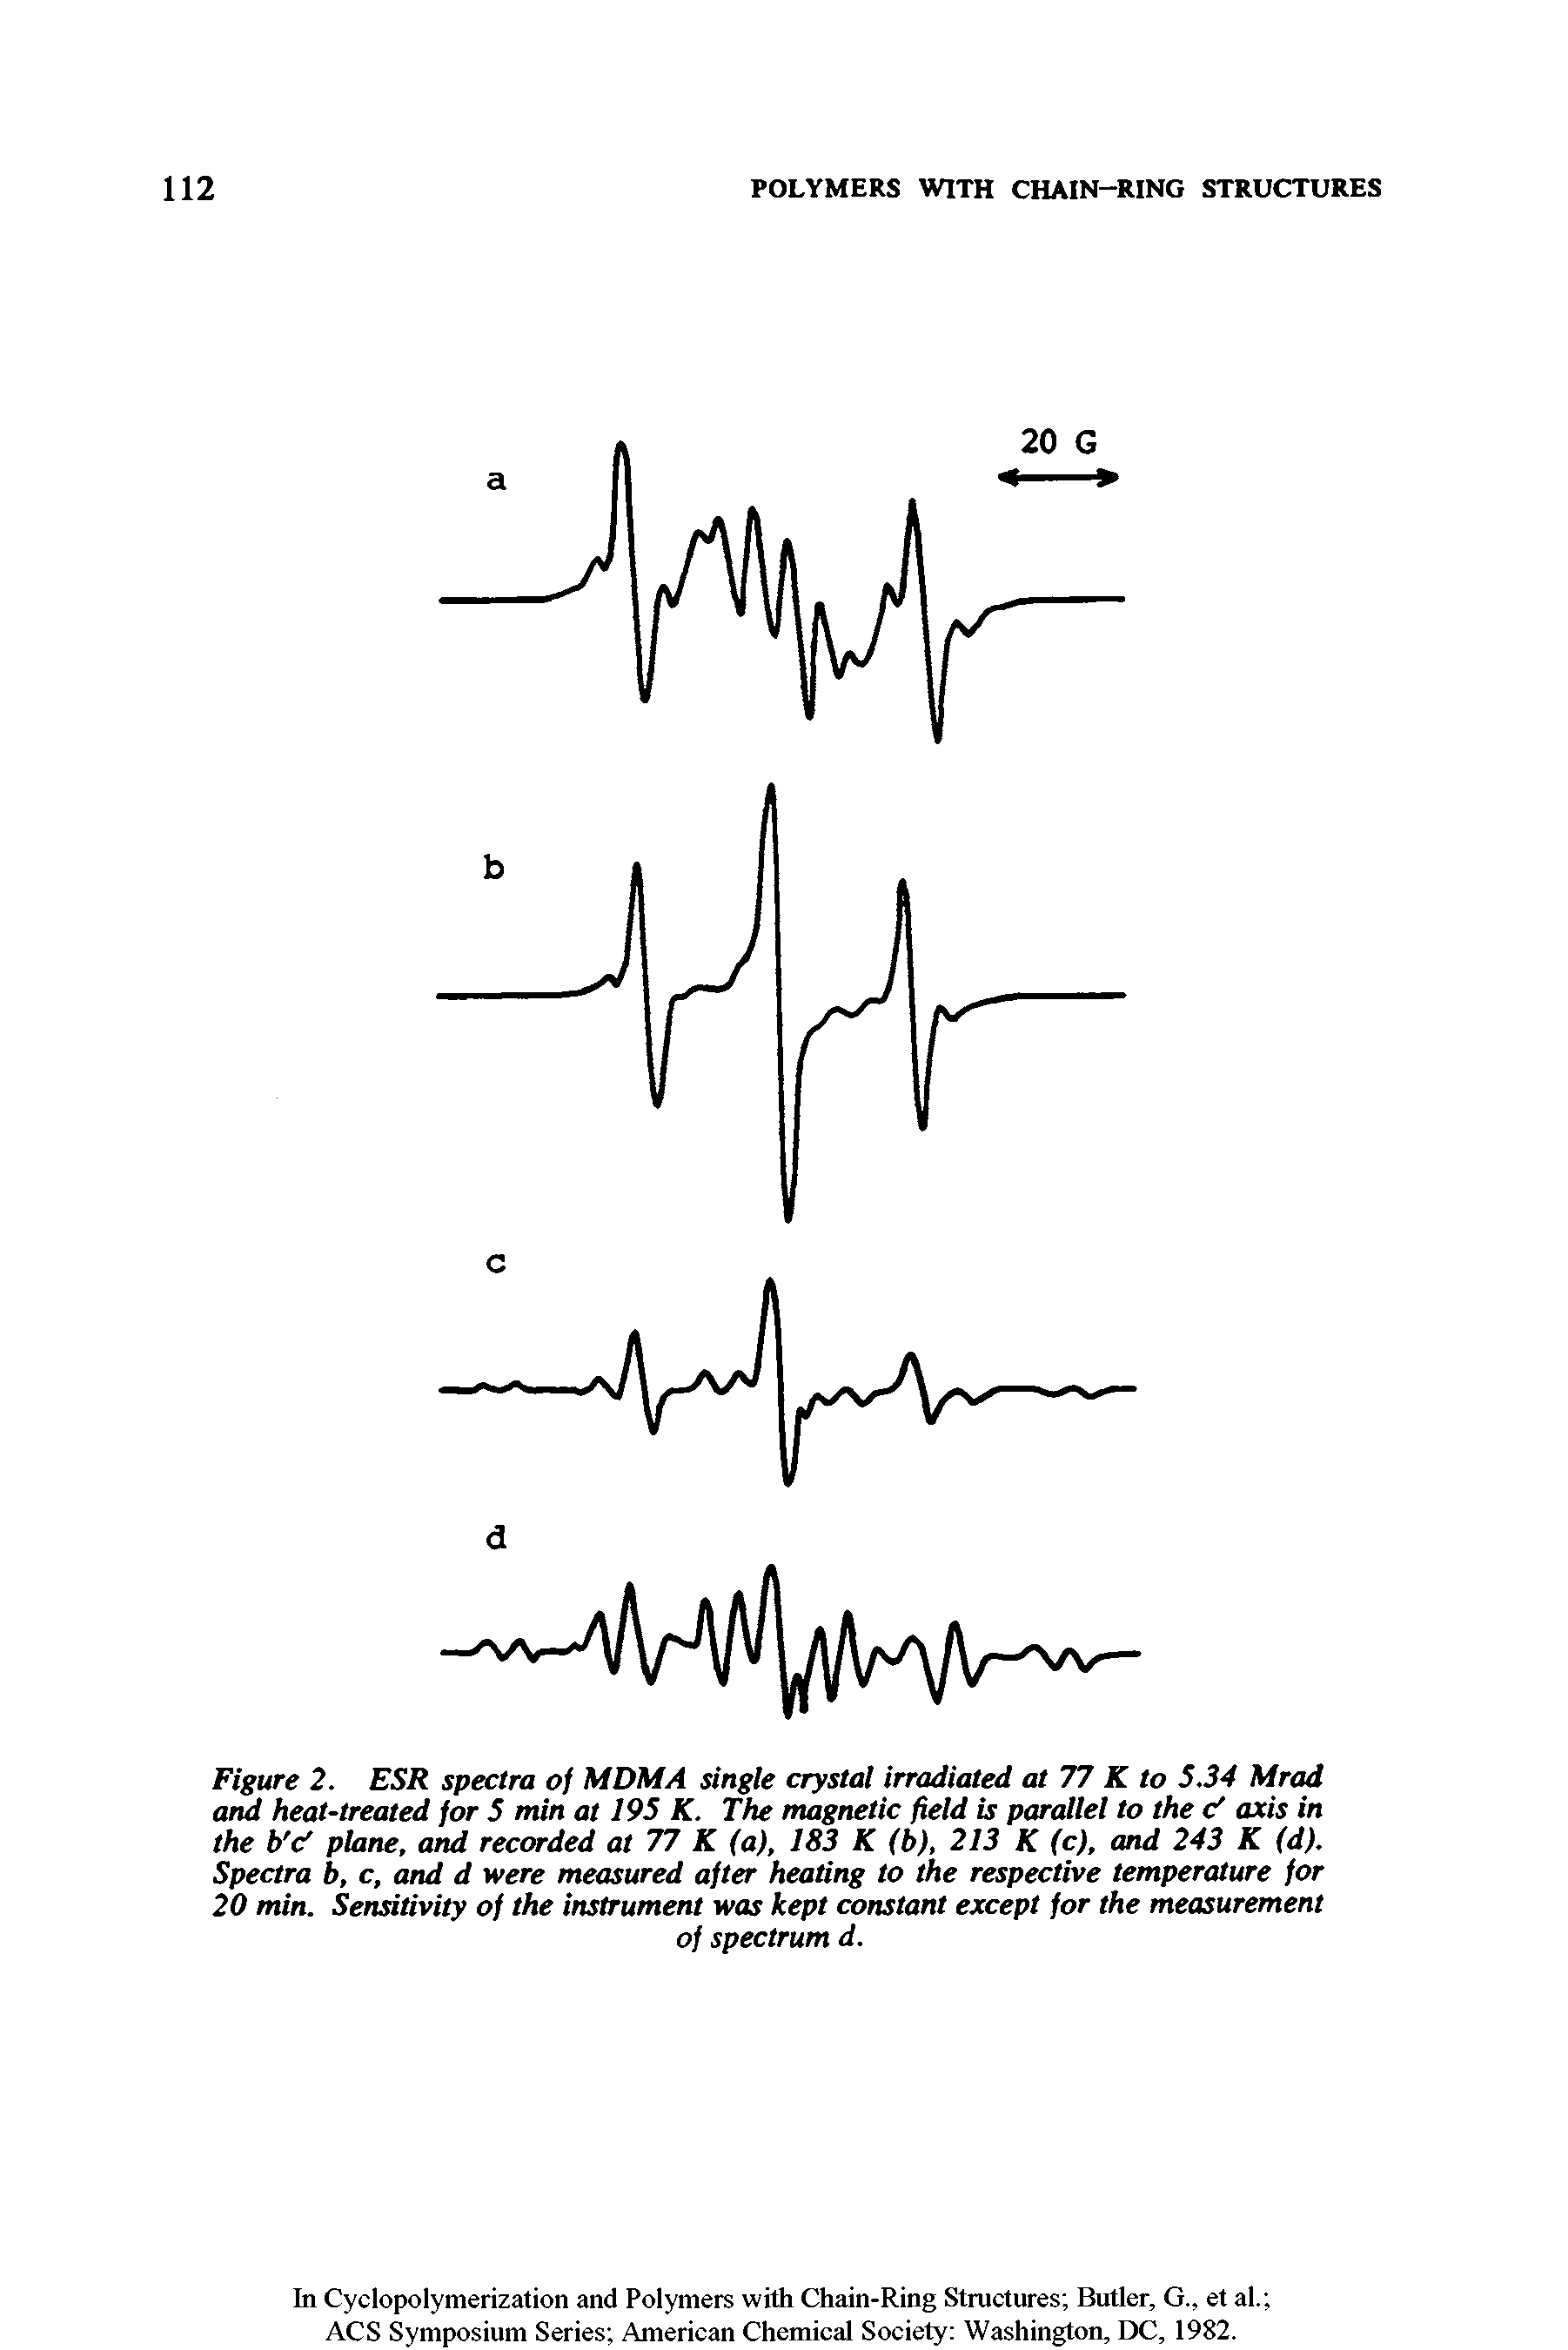 Figure 2. ESR spectra of MDMA single crystal irradiated at 77 K to 5.34 Mrad and heat-treated for 5 min at 195 K. The magnetic field is parallel to the < axis in the b c plane, and recorded at 77 K (a), 183 K (b), 213 K (c), and 243 K (d). Spectra b, c, and d were measured after heating to the respective temperature for 20 min. Sensitivity of the instrument was kept constant except for the measurement...